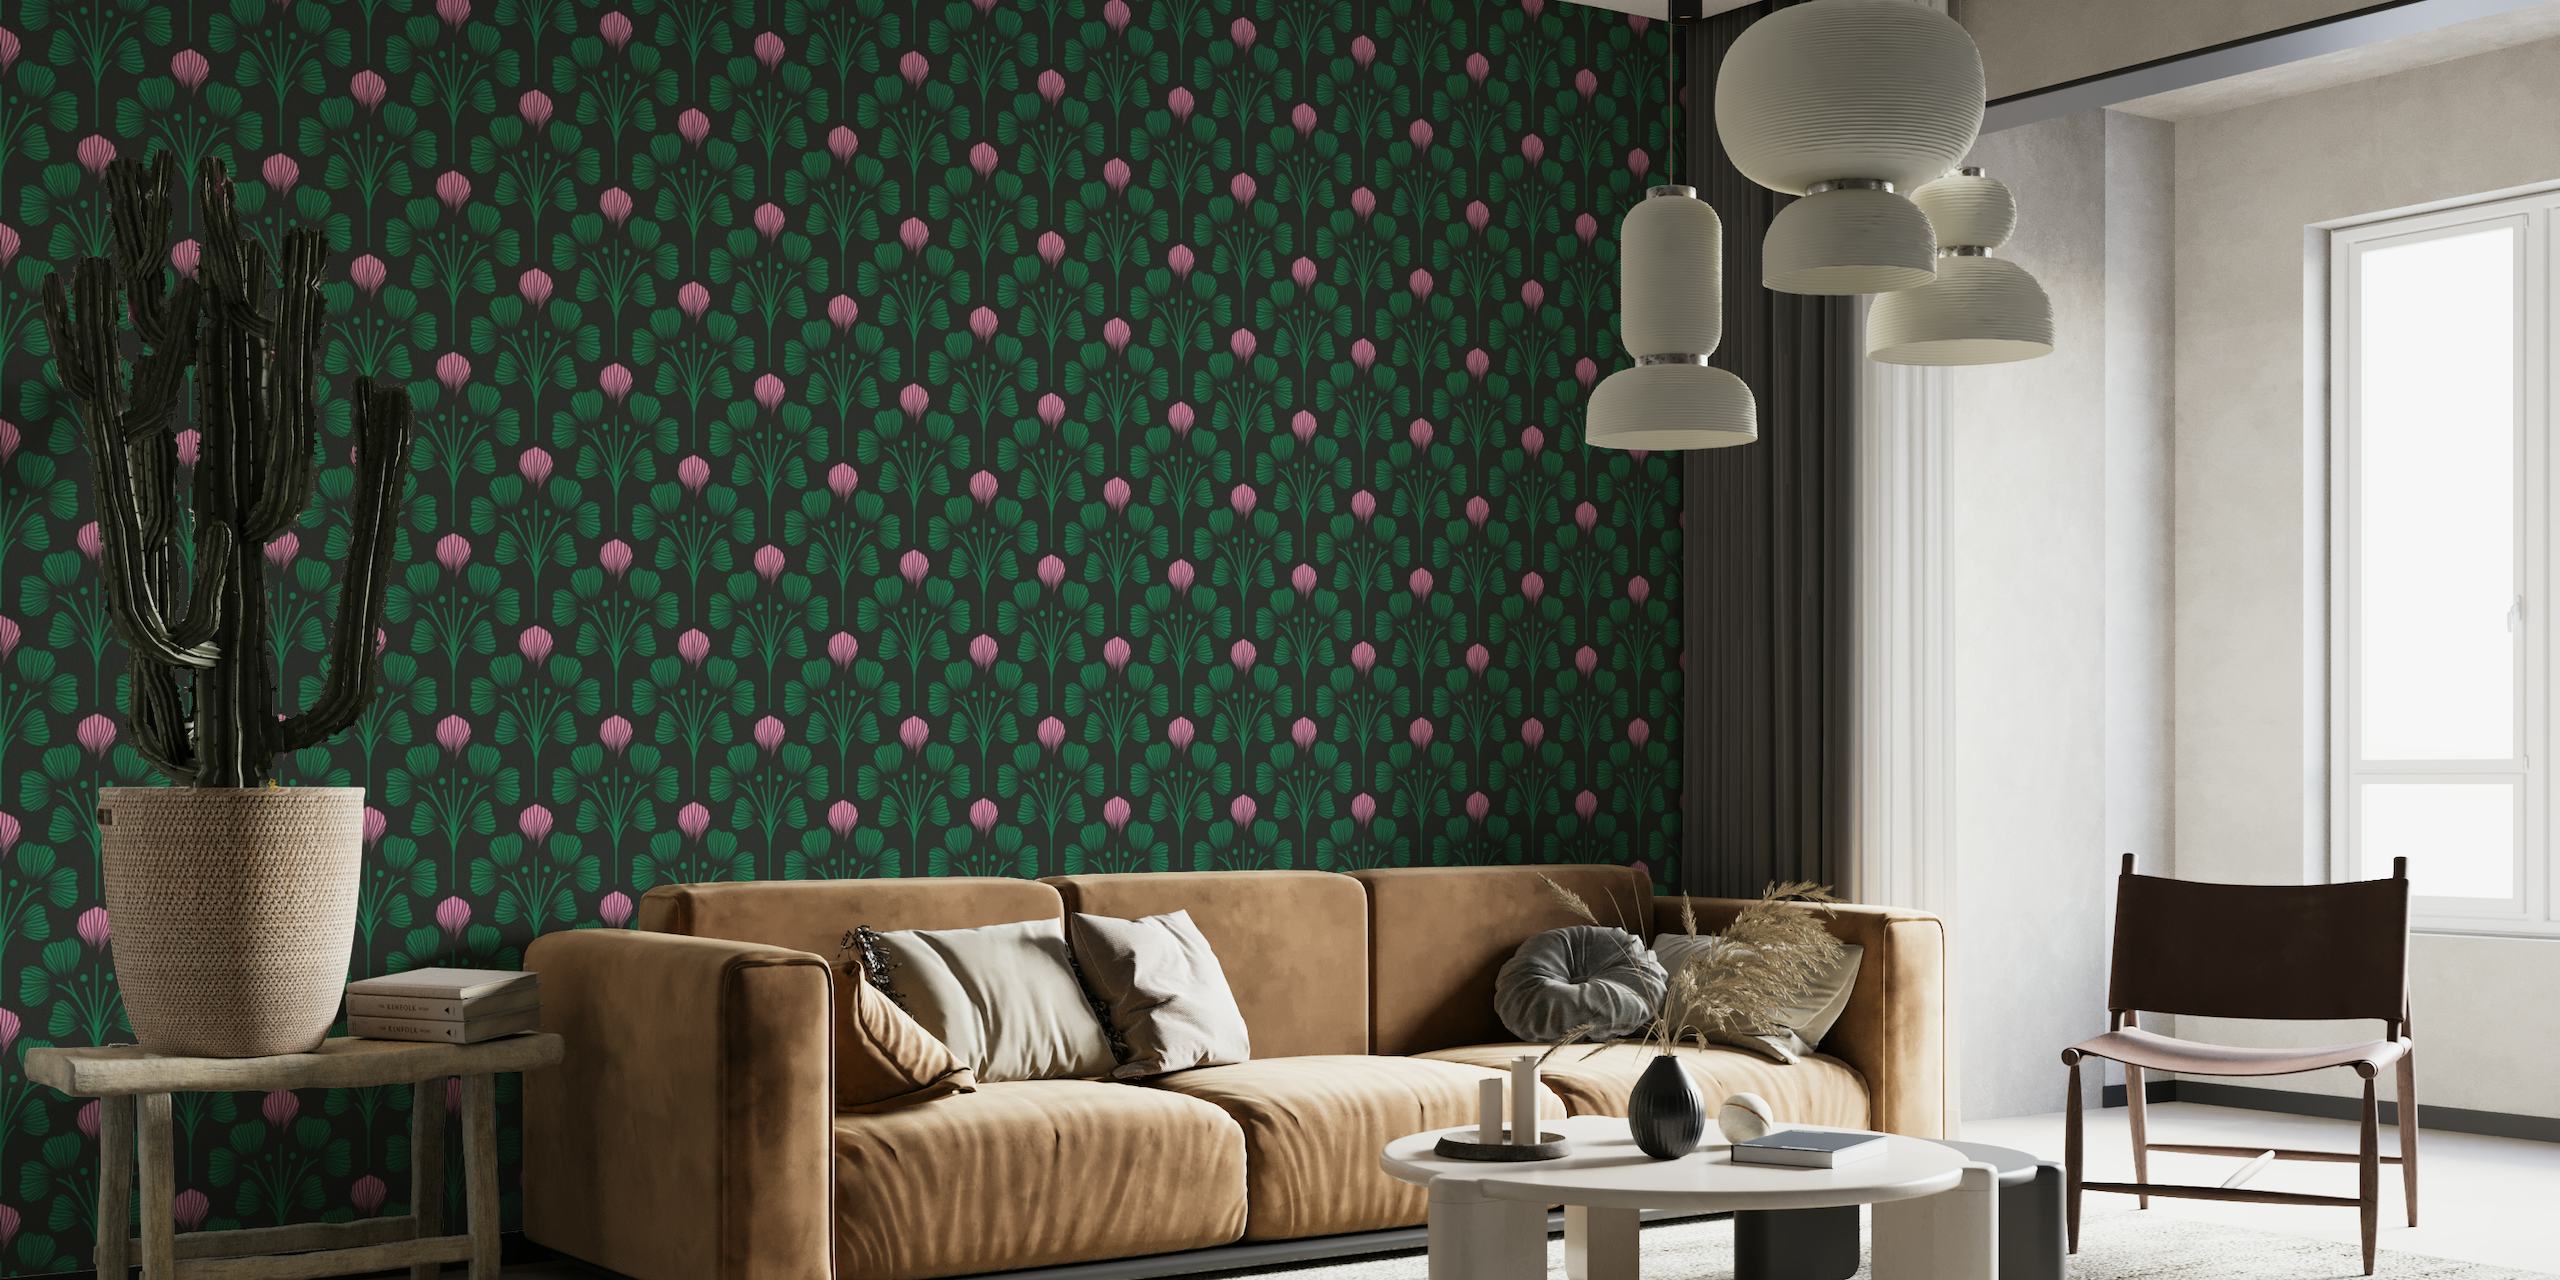 Floral pattern wall mural with black background, green leaves, and pink flowers